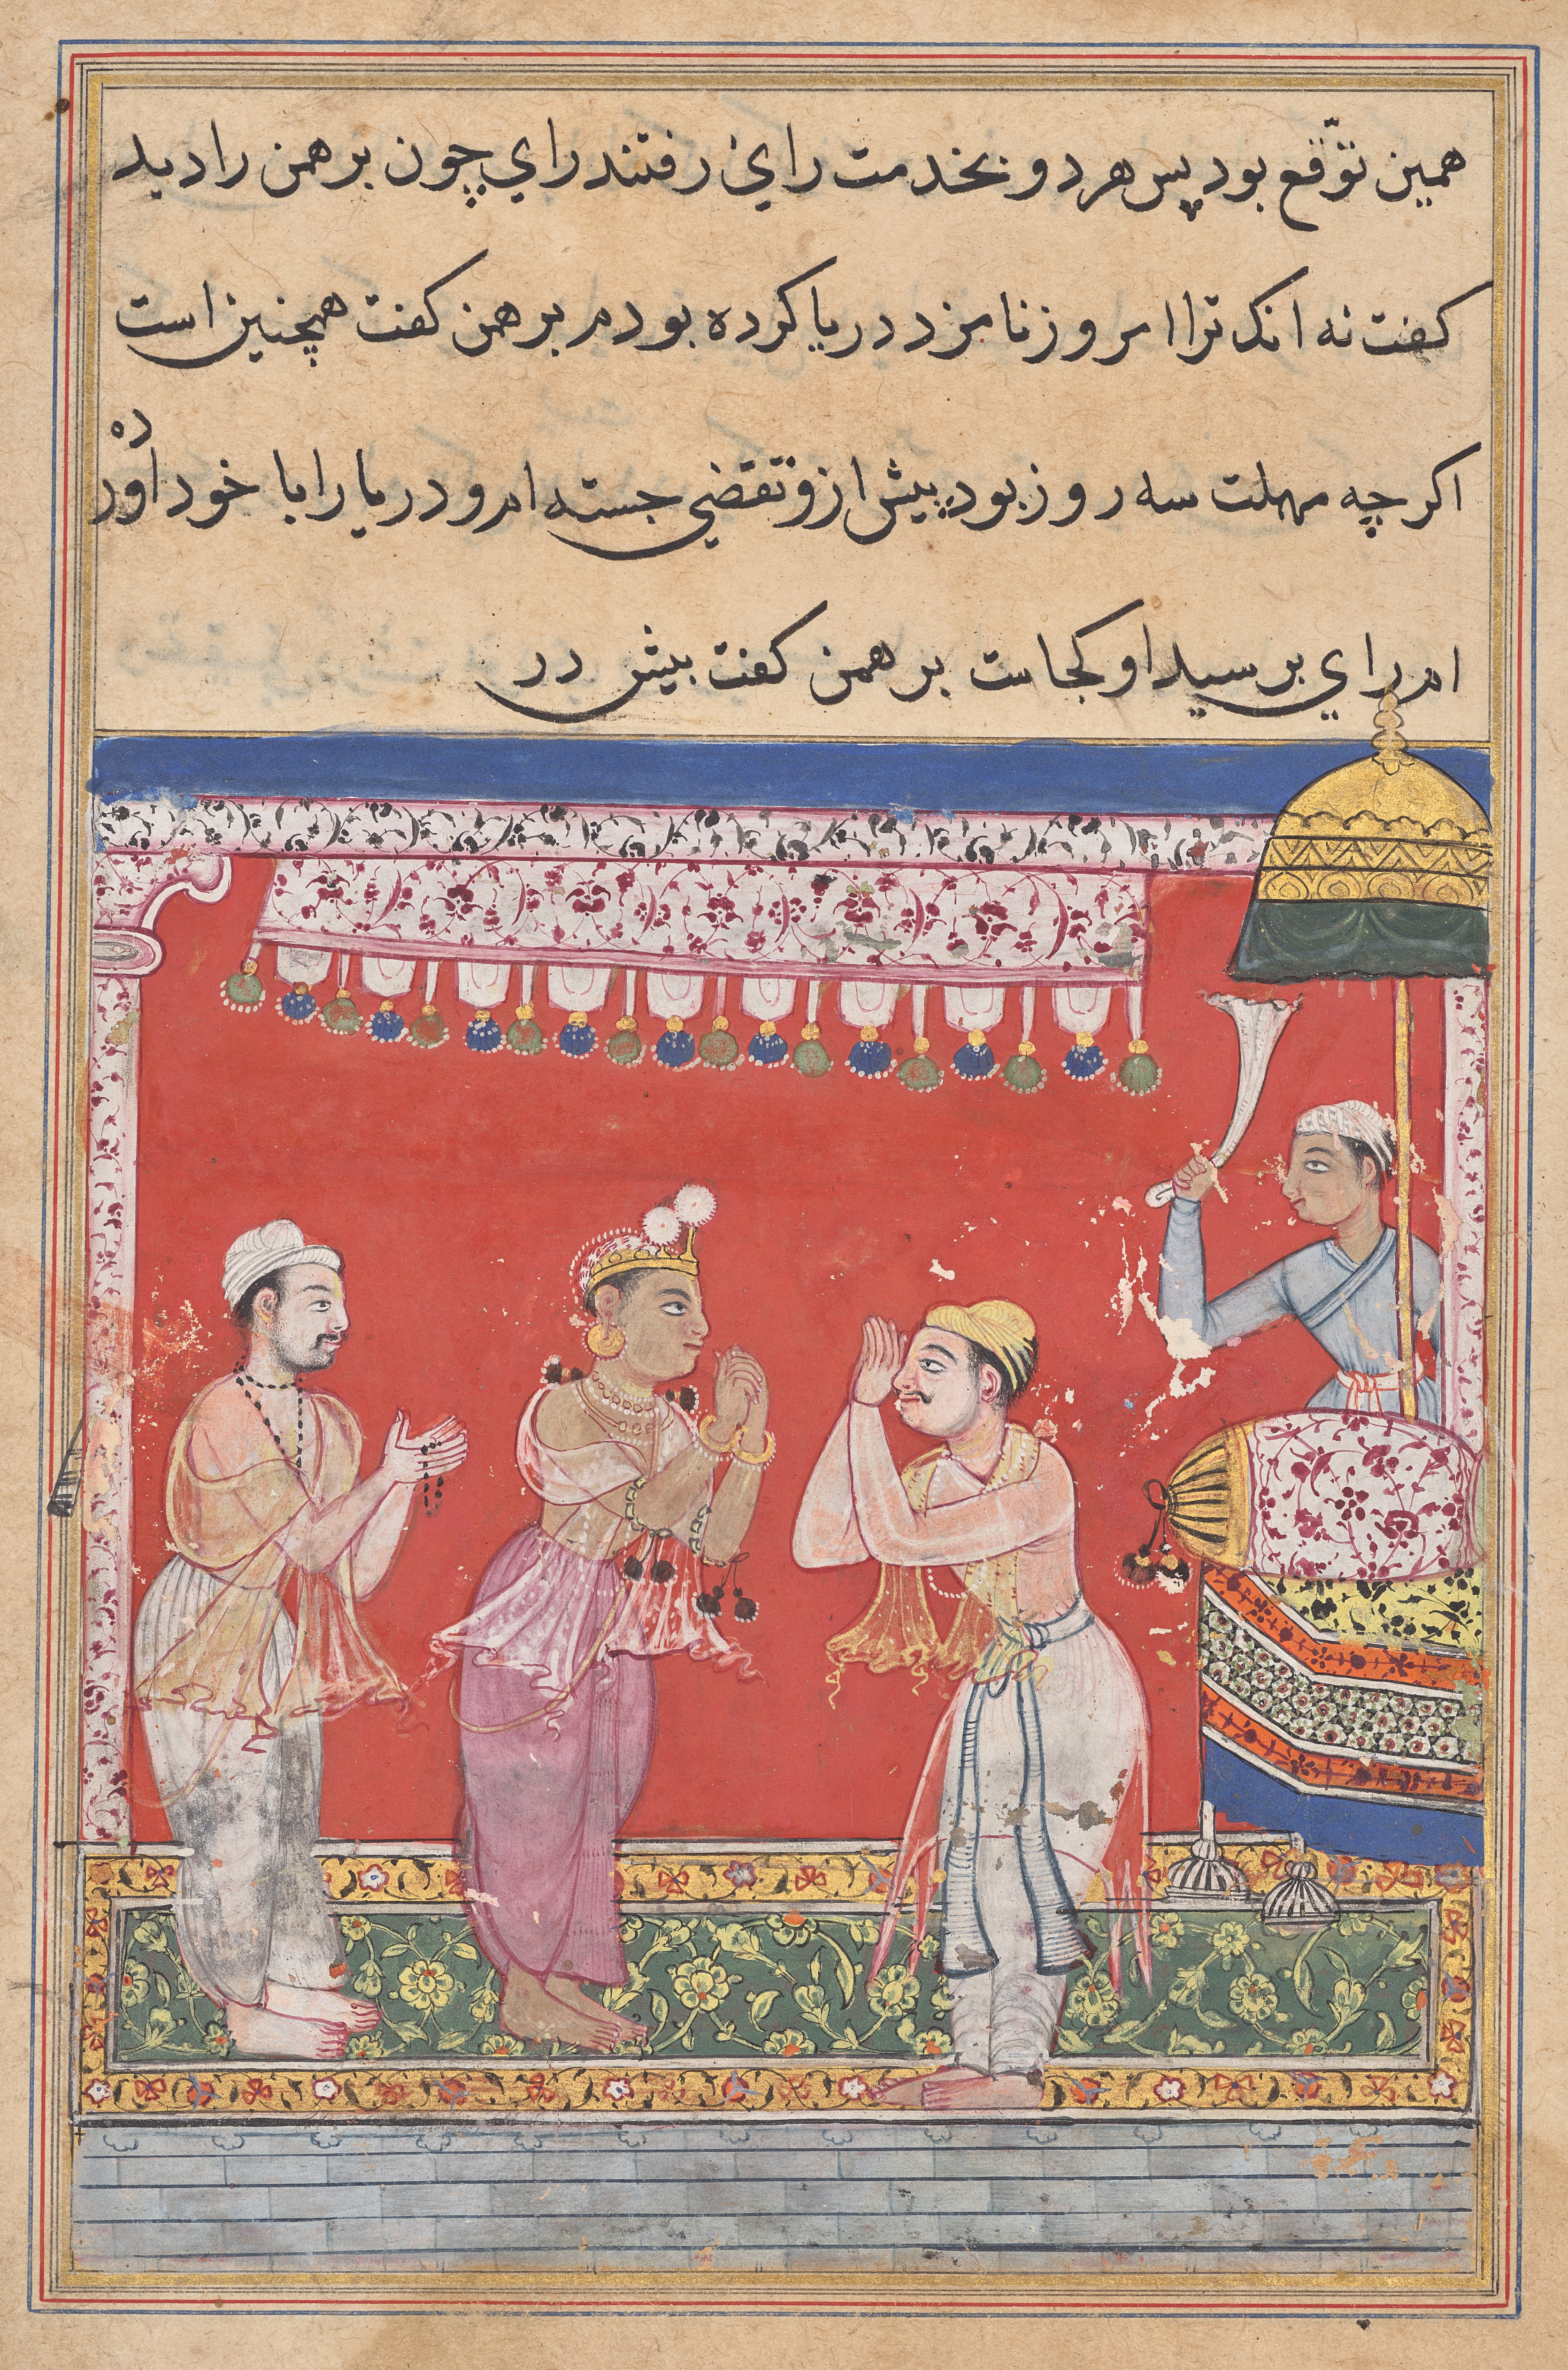 The king of the Ocean, having assumed human form, arrives at the court of the Raja, from a Tuti-nama (Tales of a Parrot): Eleventh Night